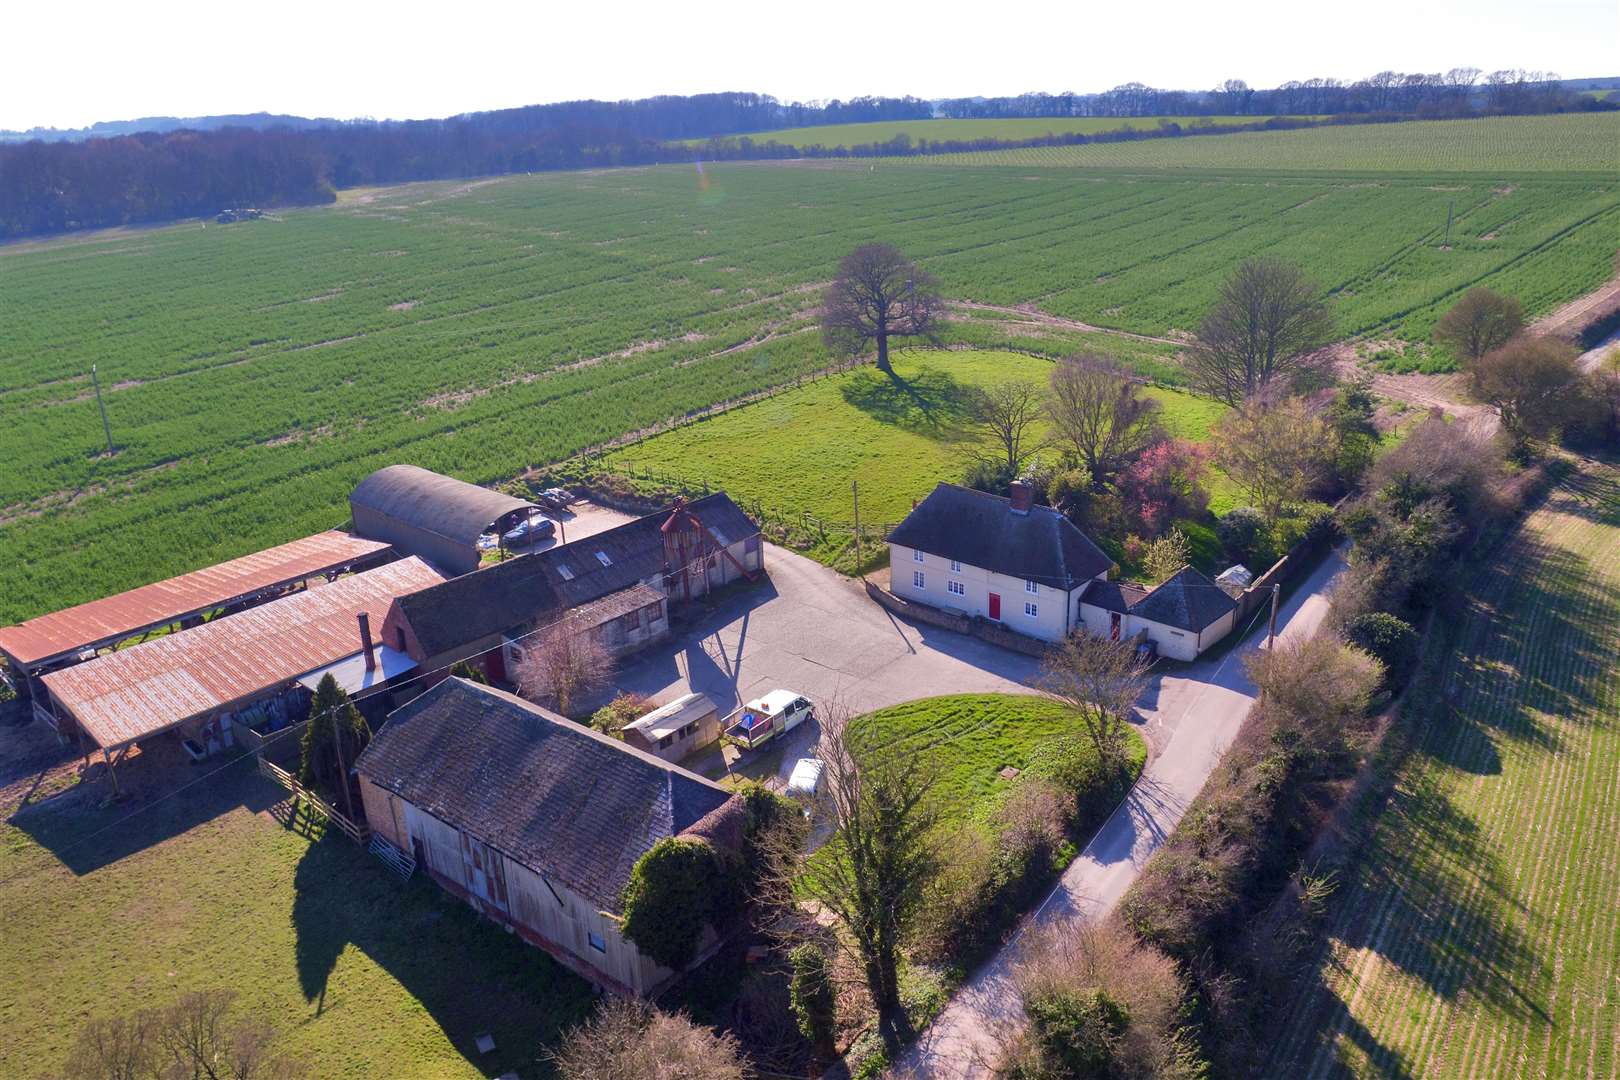 Long Lane Farm is on the market for the first time in 80 years